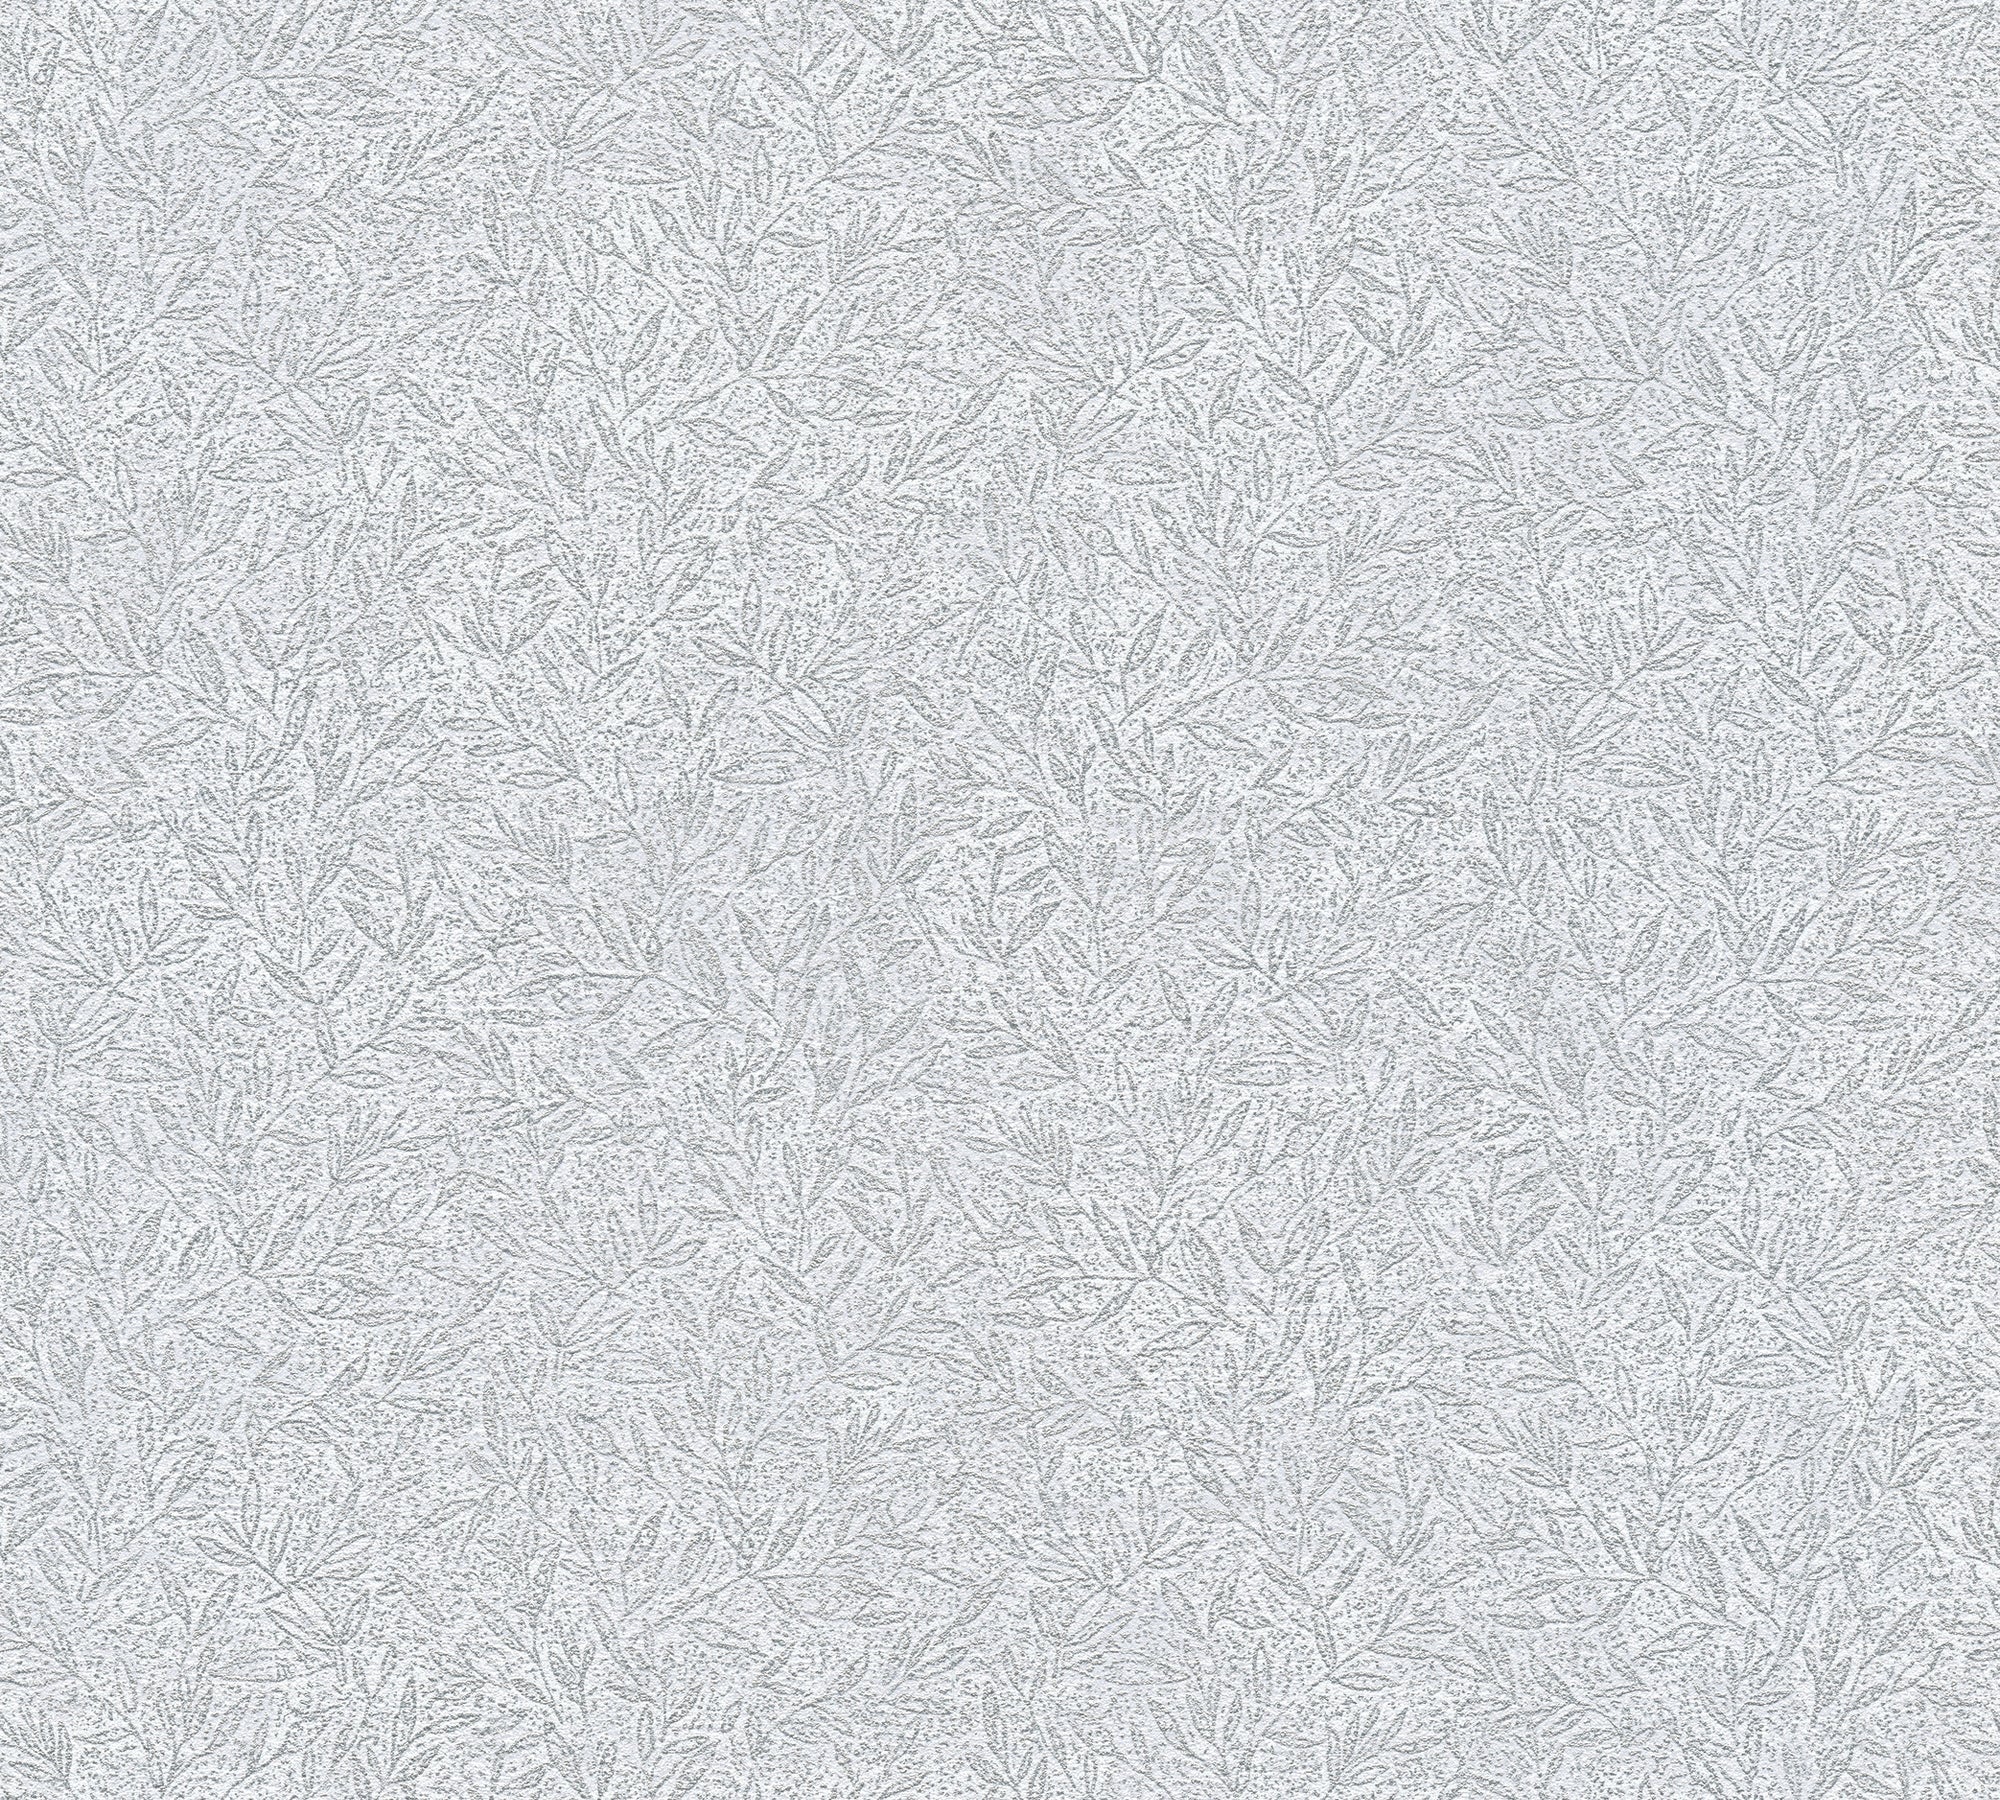 Attractive - Leafy botanical wallpaper AS Creation Roll Silver  378371